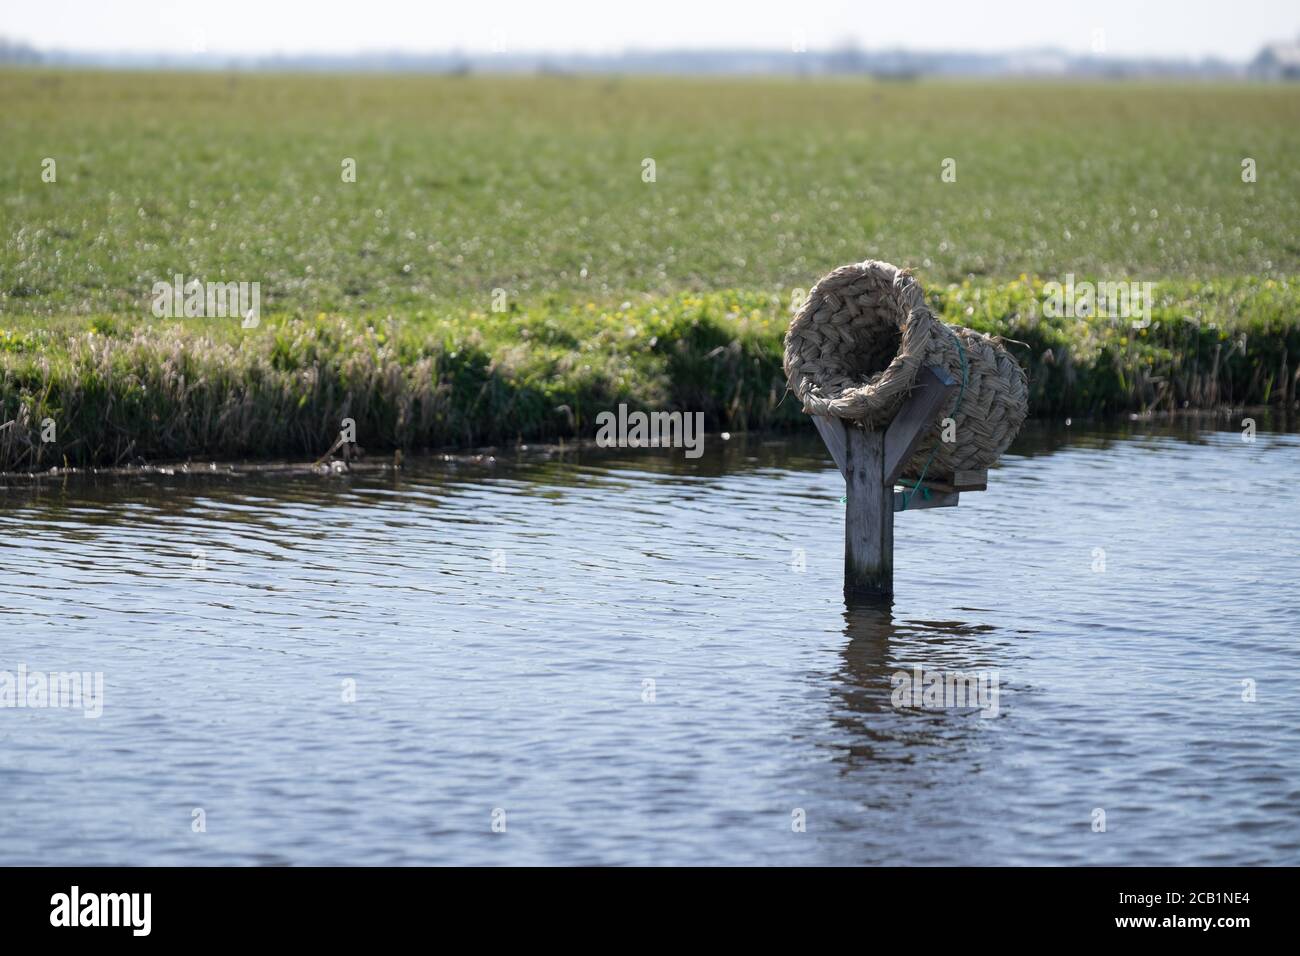 Wicker duck basket on a wooden post in a ditch, mirrored in water, an ideal hiding and breeding place for wild ducks and other water birds Stock Photo